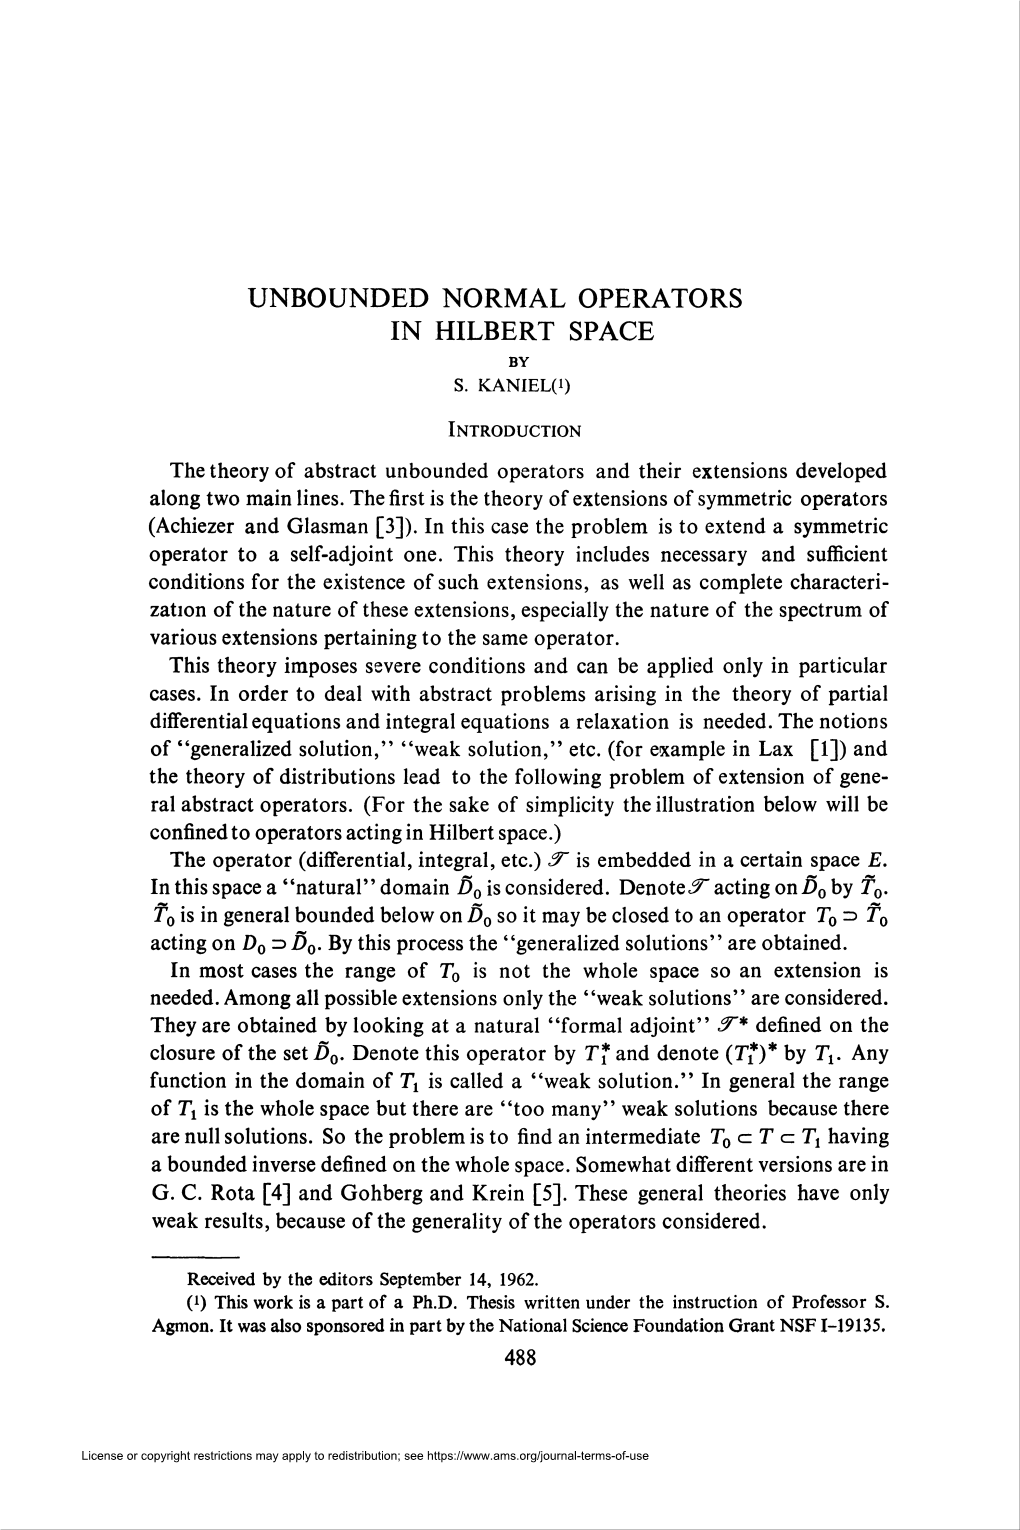 Unbounded Normal Operators in Hilbert Space by S